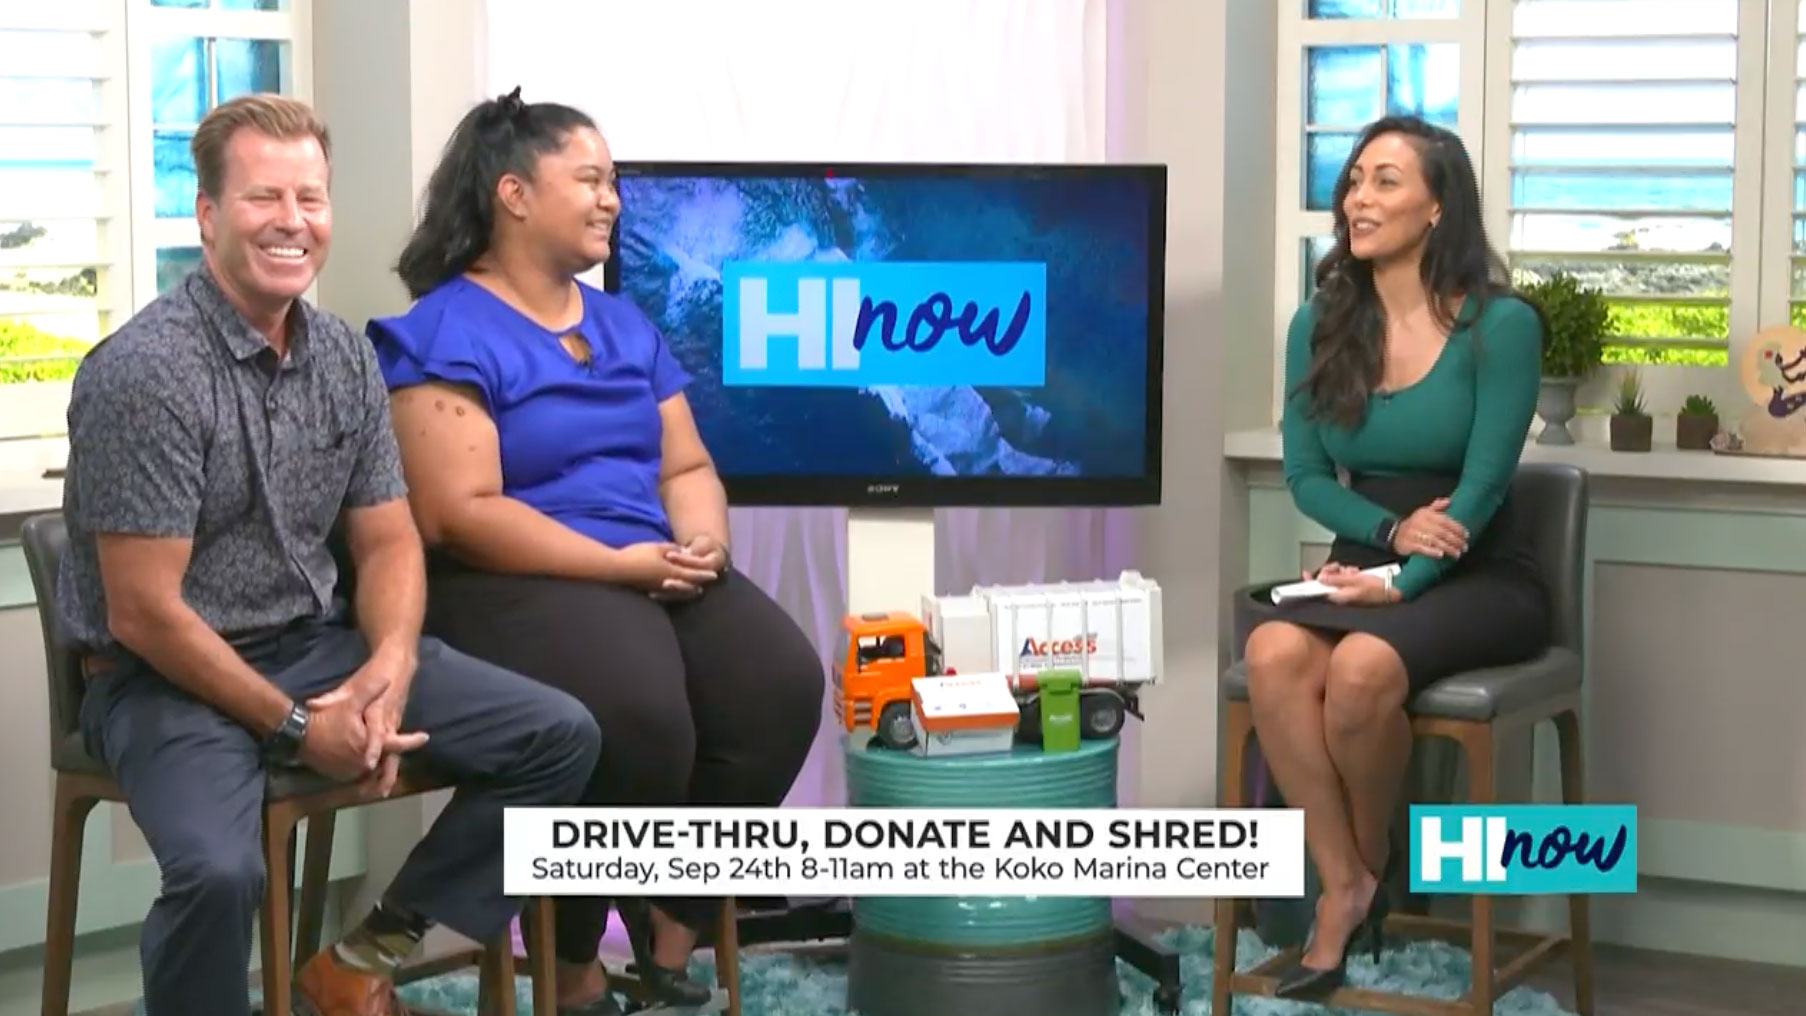 Drive-Thru, Donate and Shred Event Featured on HI Now!